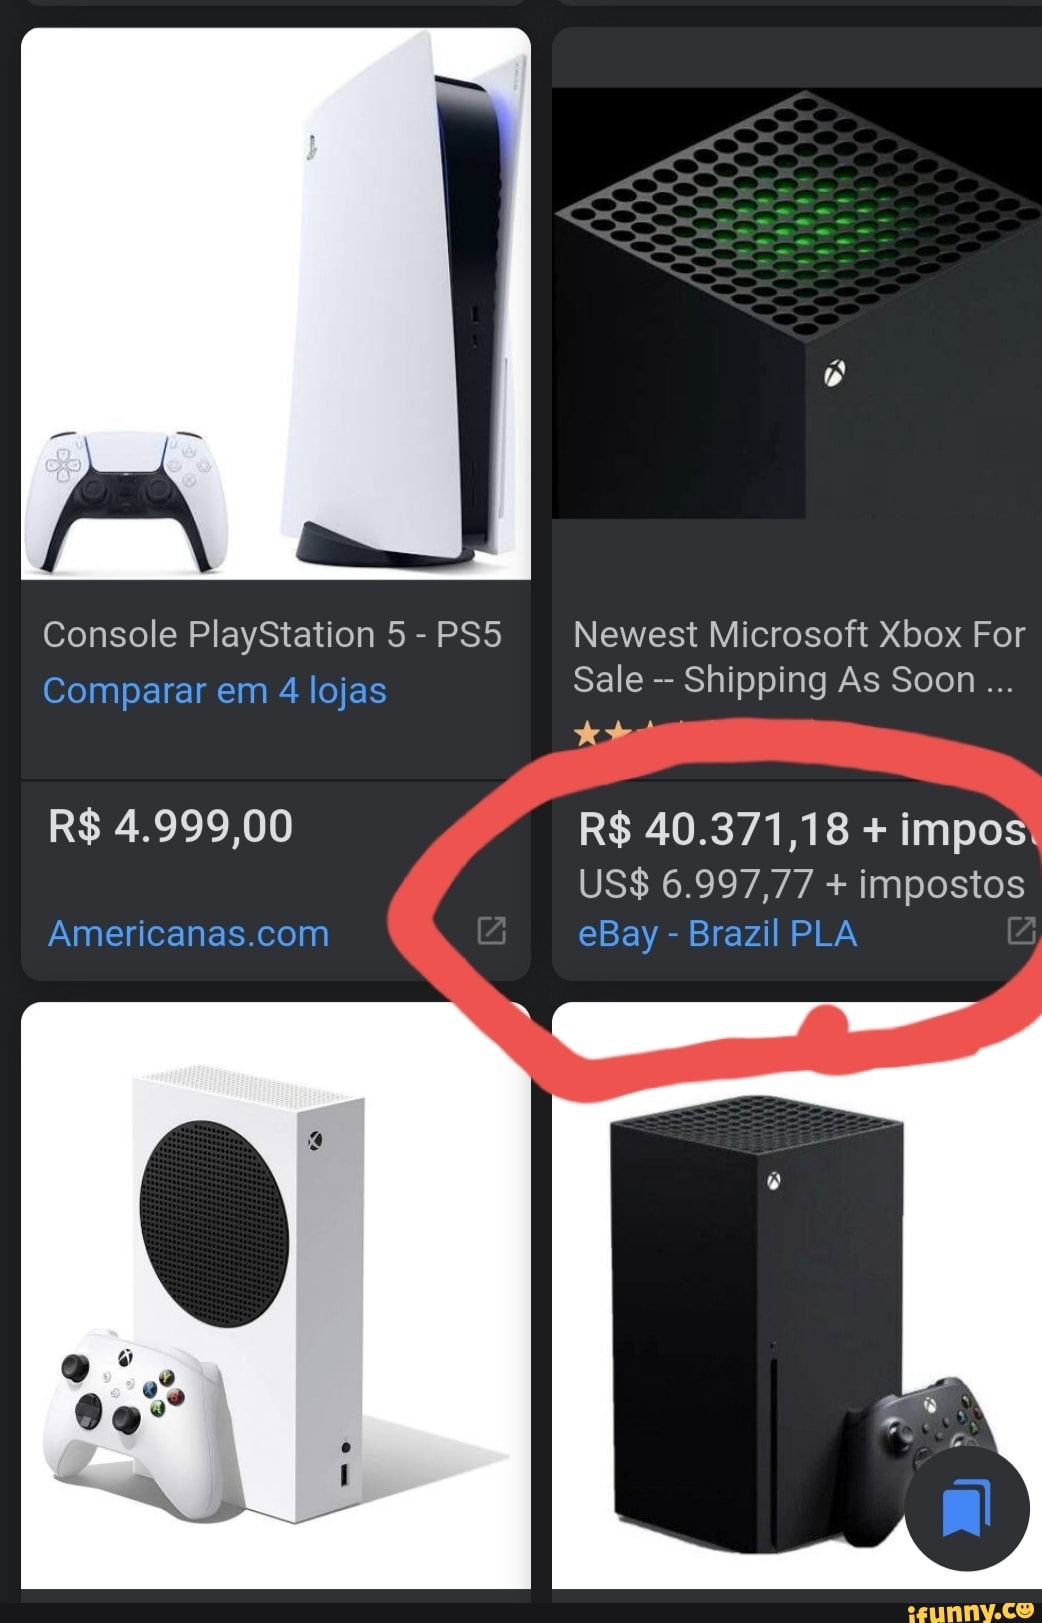 Console PlayStation 5-PS5 Comparar em 4 lojas R$ 4.999,00 Newest Microsoft  Xbox For Sale Shipping As Soon R$ 40.371,18 + impo US$ 6.997,77 +  impostos  - Brazil PLA - iFunny Brazil